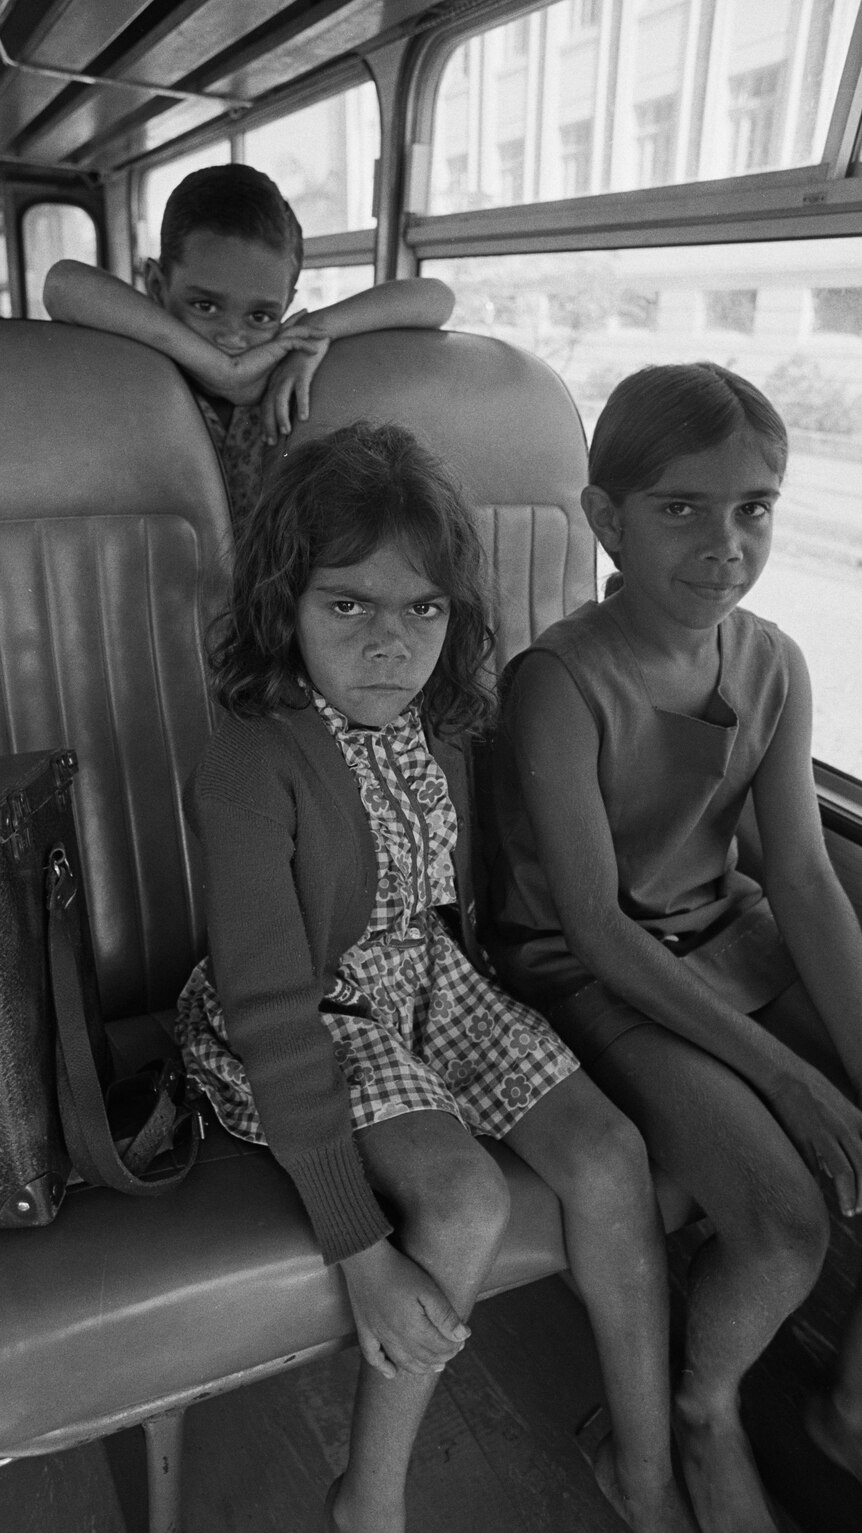 Two young girls and a young boy sitting on a bus.